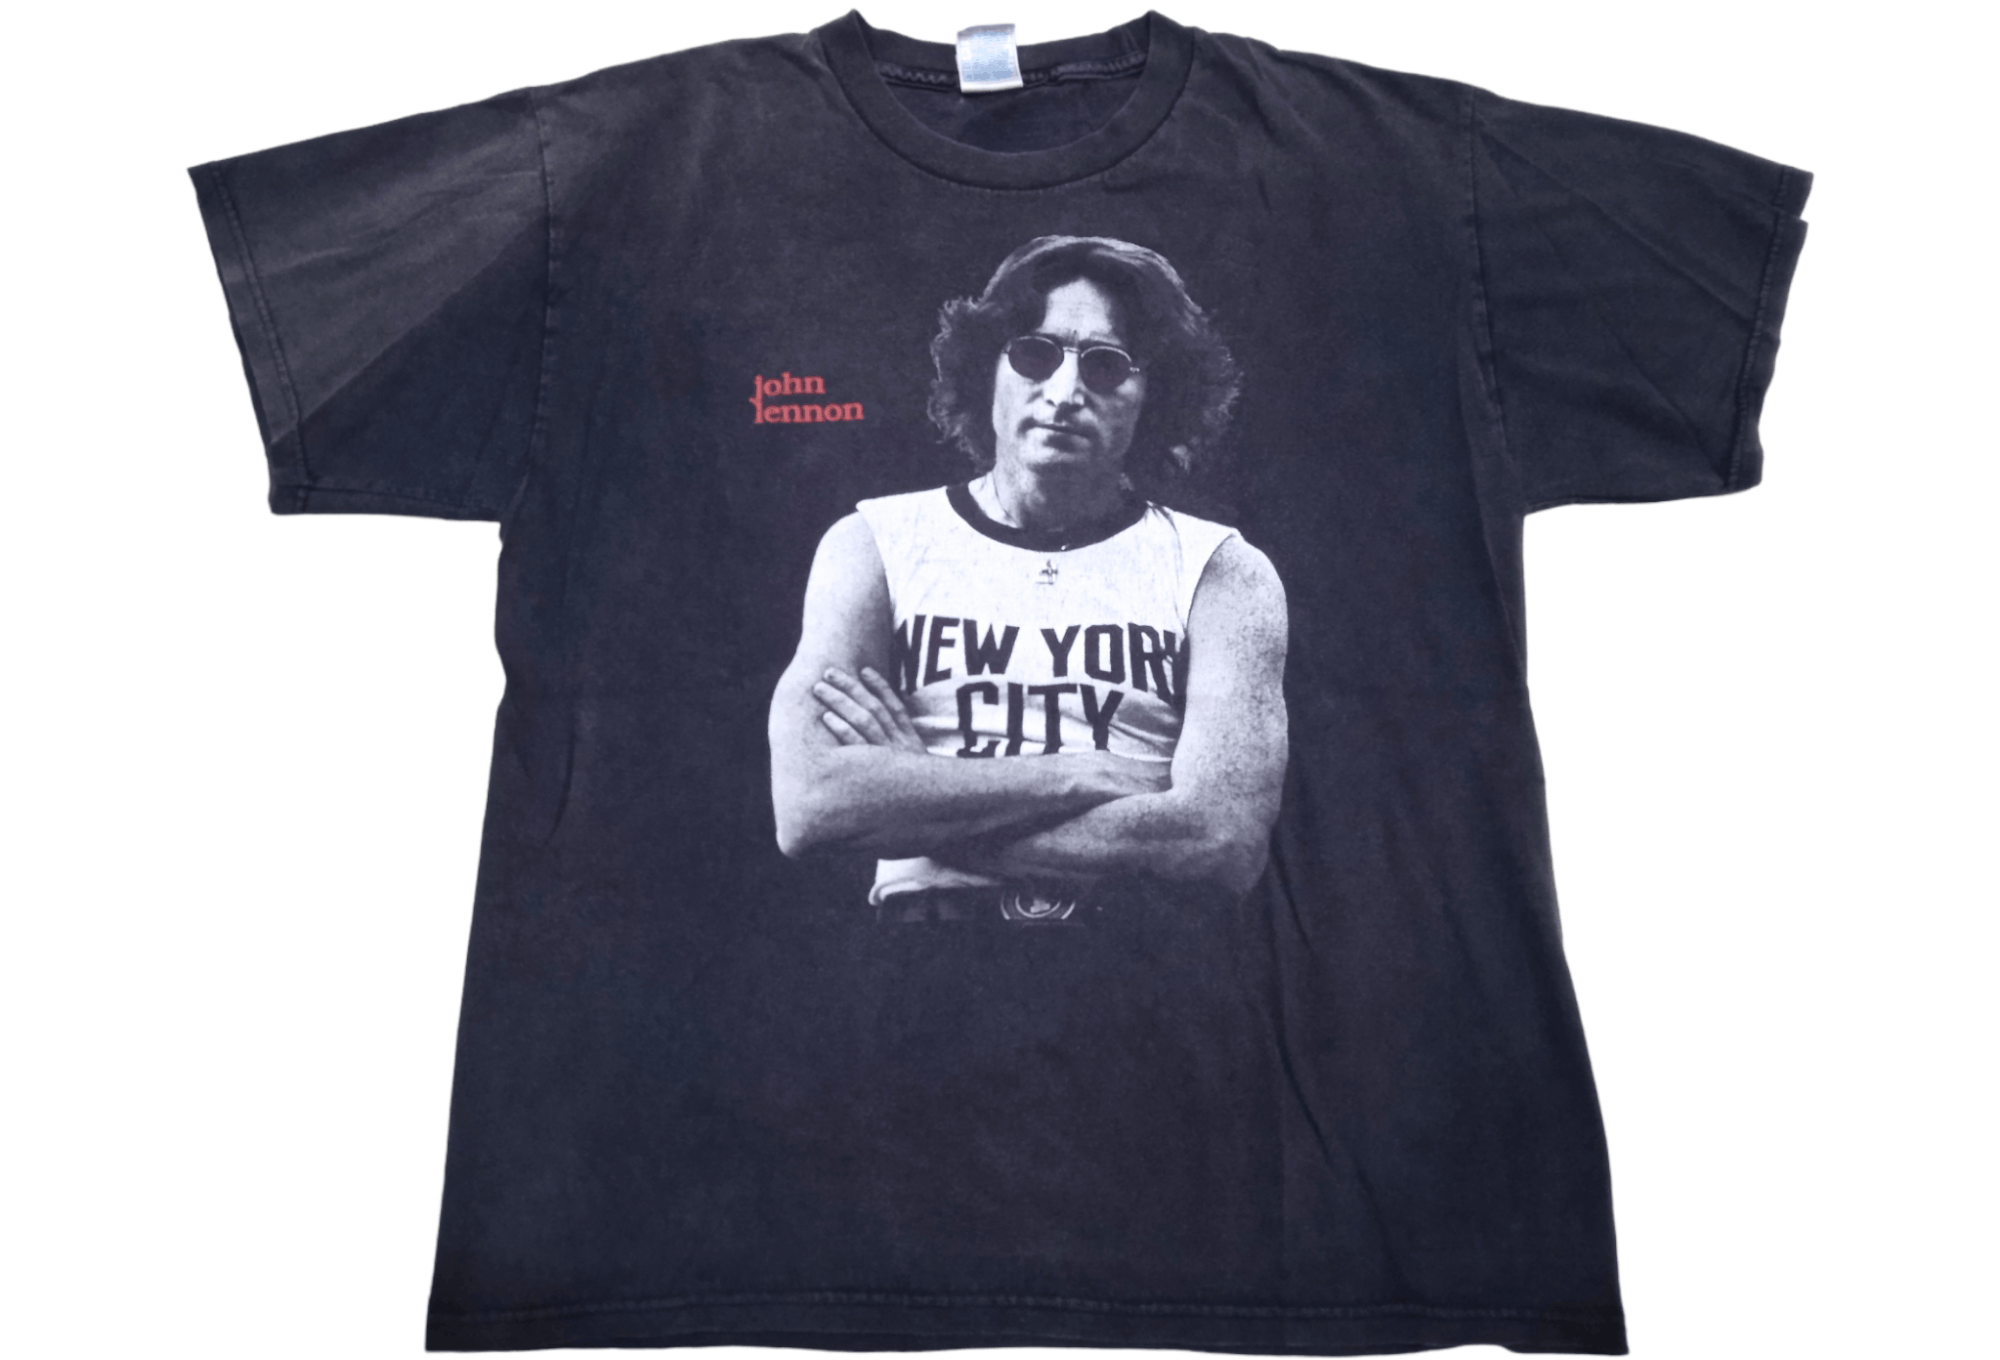 Pre-owned Band Tees X Vintage 90's John Lennon The Beatles T-shirt In Black